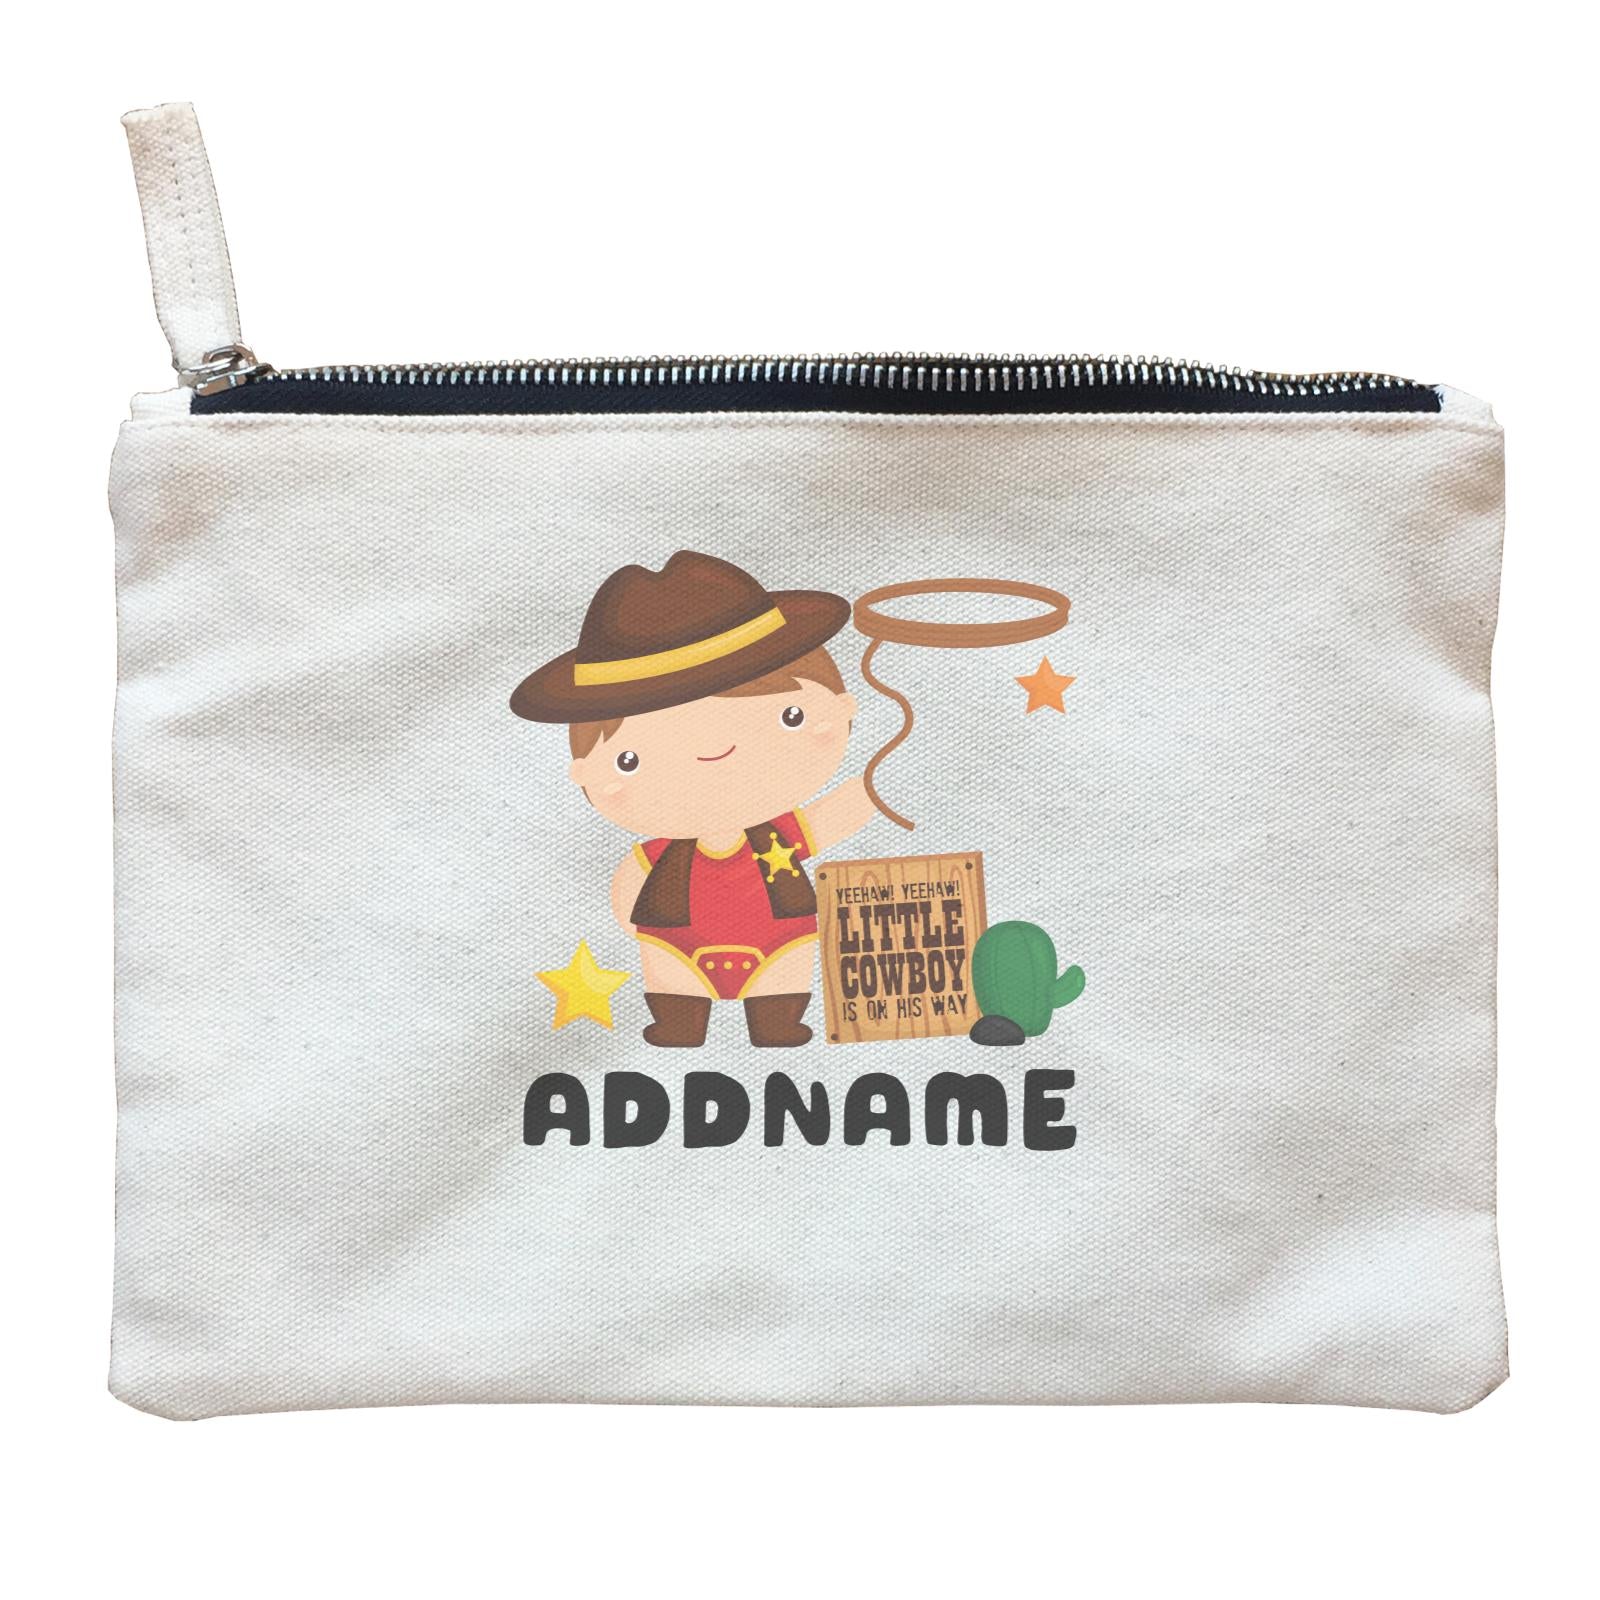 Birthday Cowboy Style Yeehaw Little Cowboy Is On His Way Addname Zipper Pouch